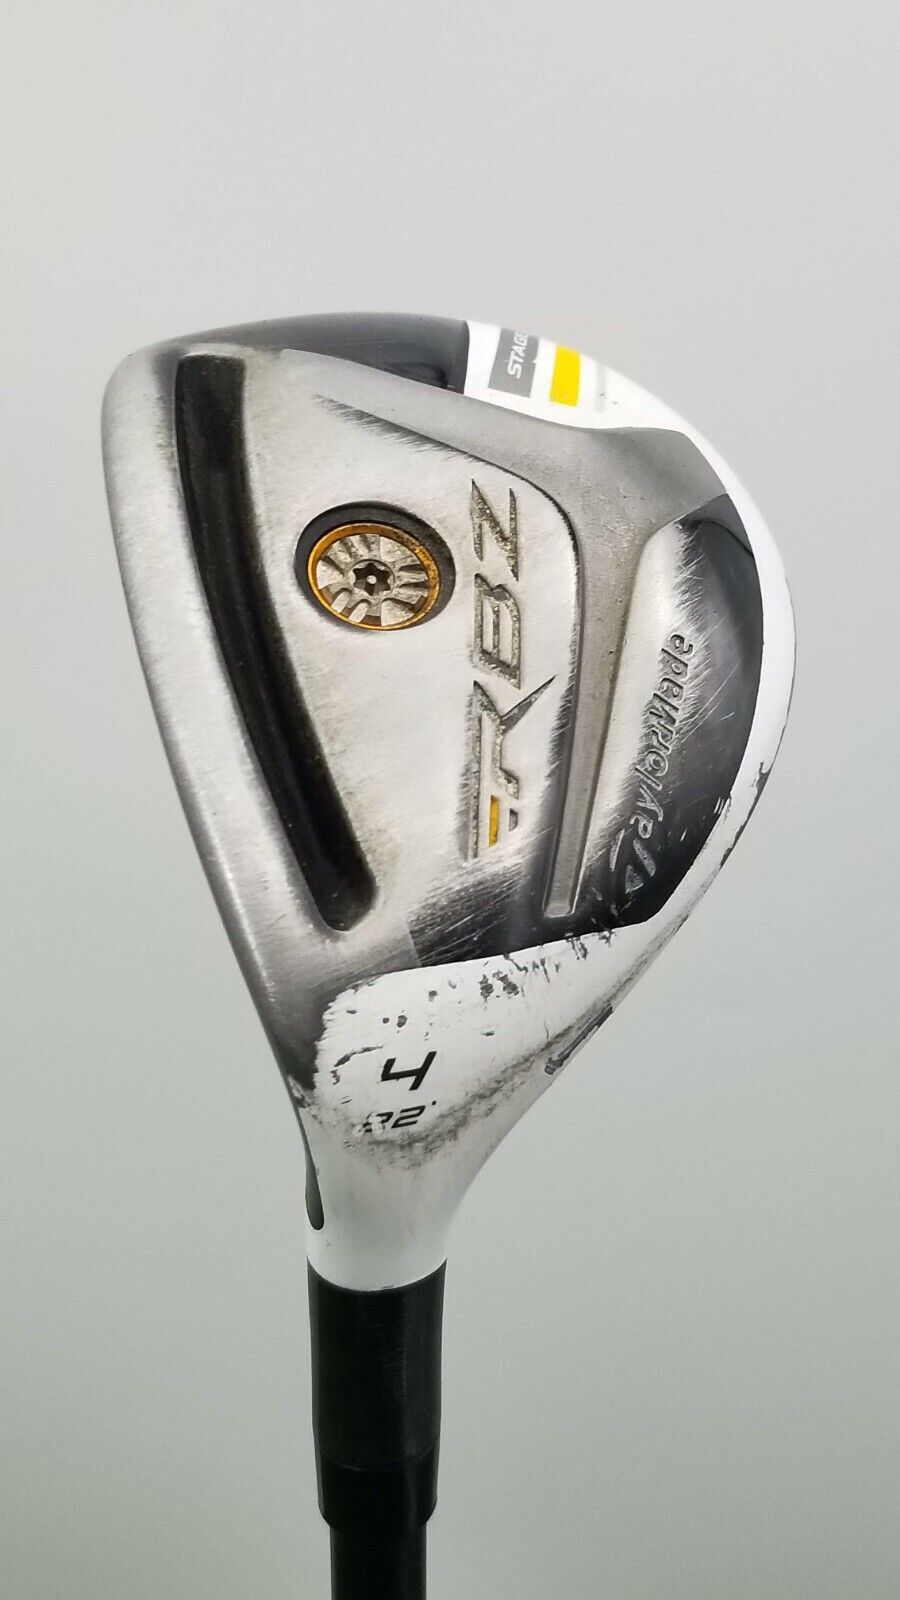 LEFTY TAYLORMADE RBZ STAGE 2 4 HYBRID 22* REG TAYLORMADE SHAFT POOR